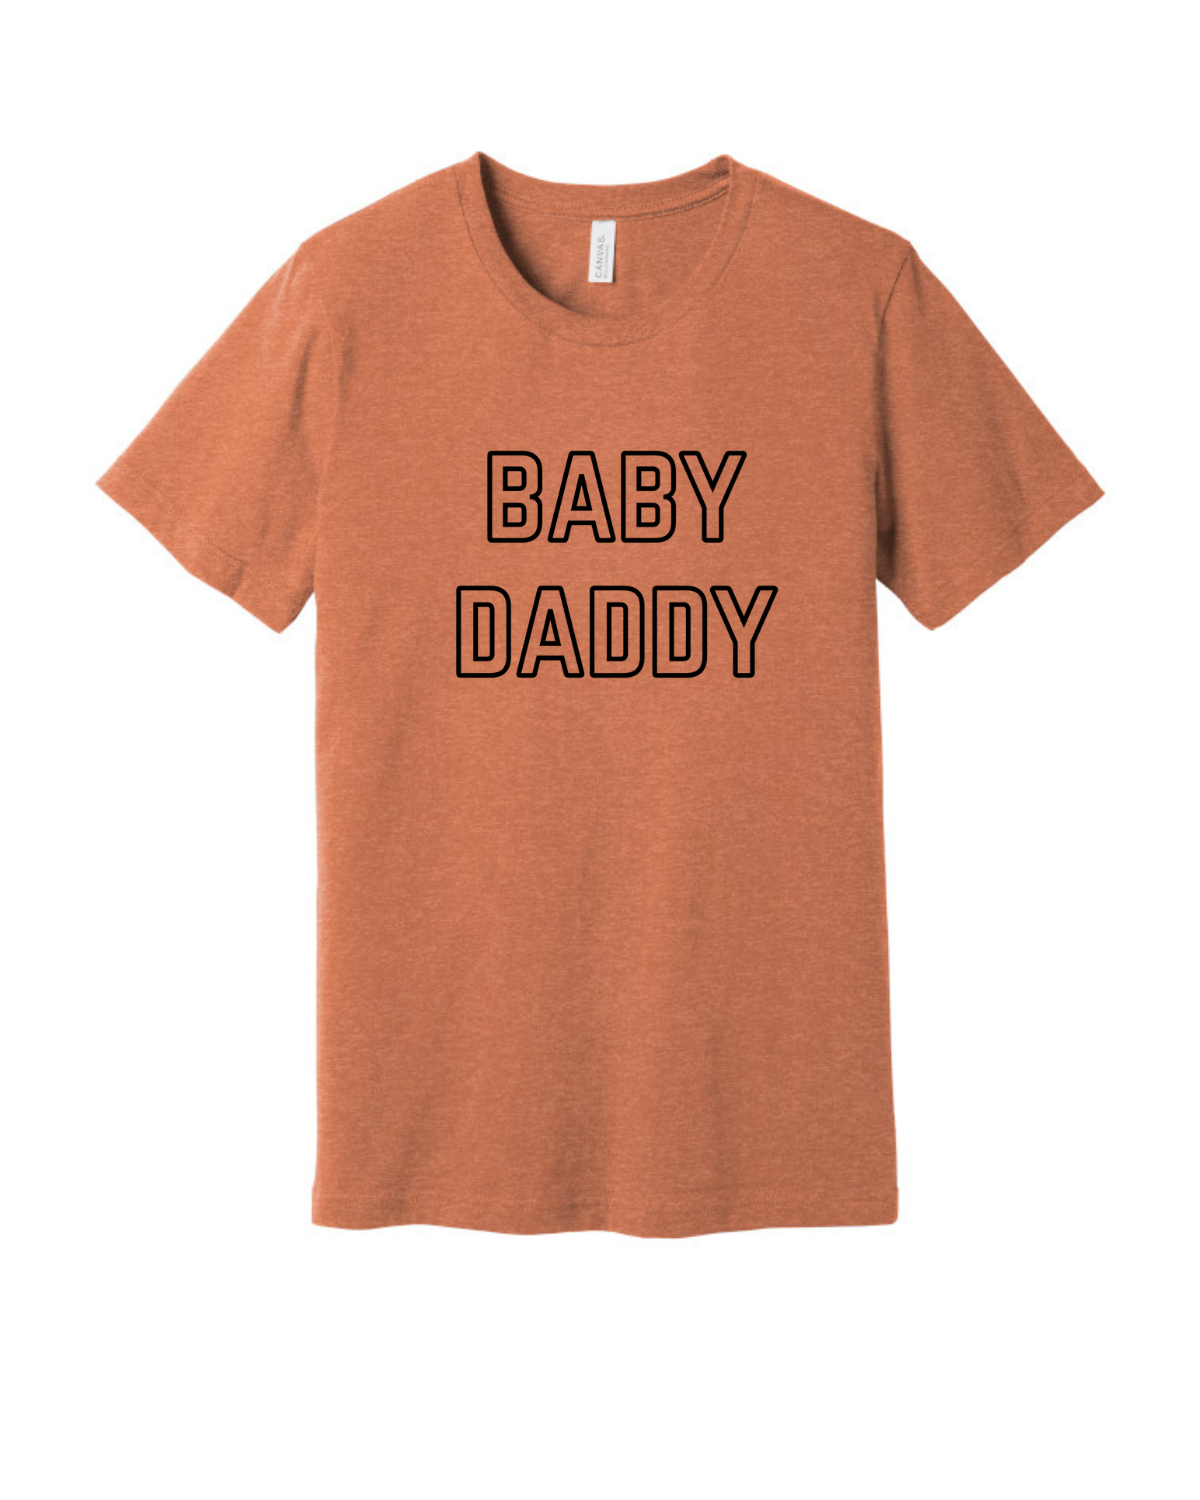 Baby Daddy Tee